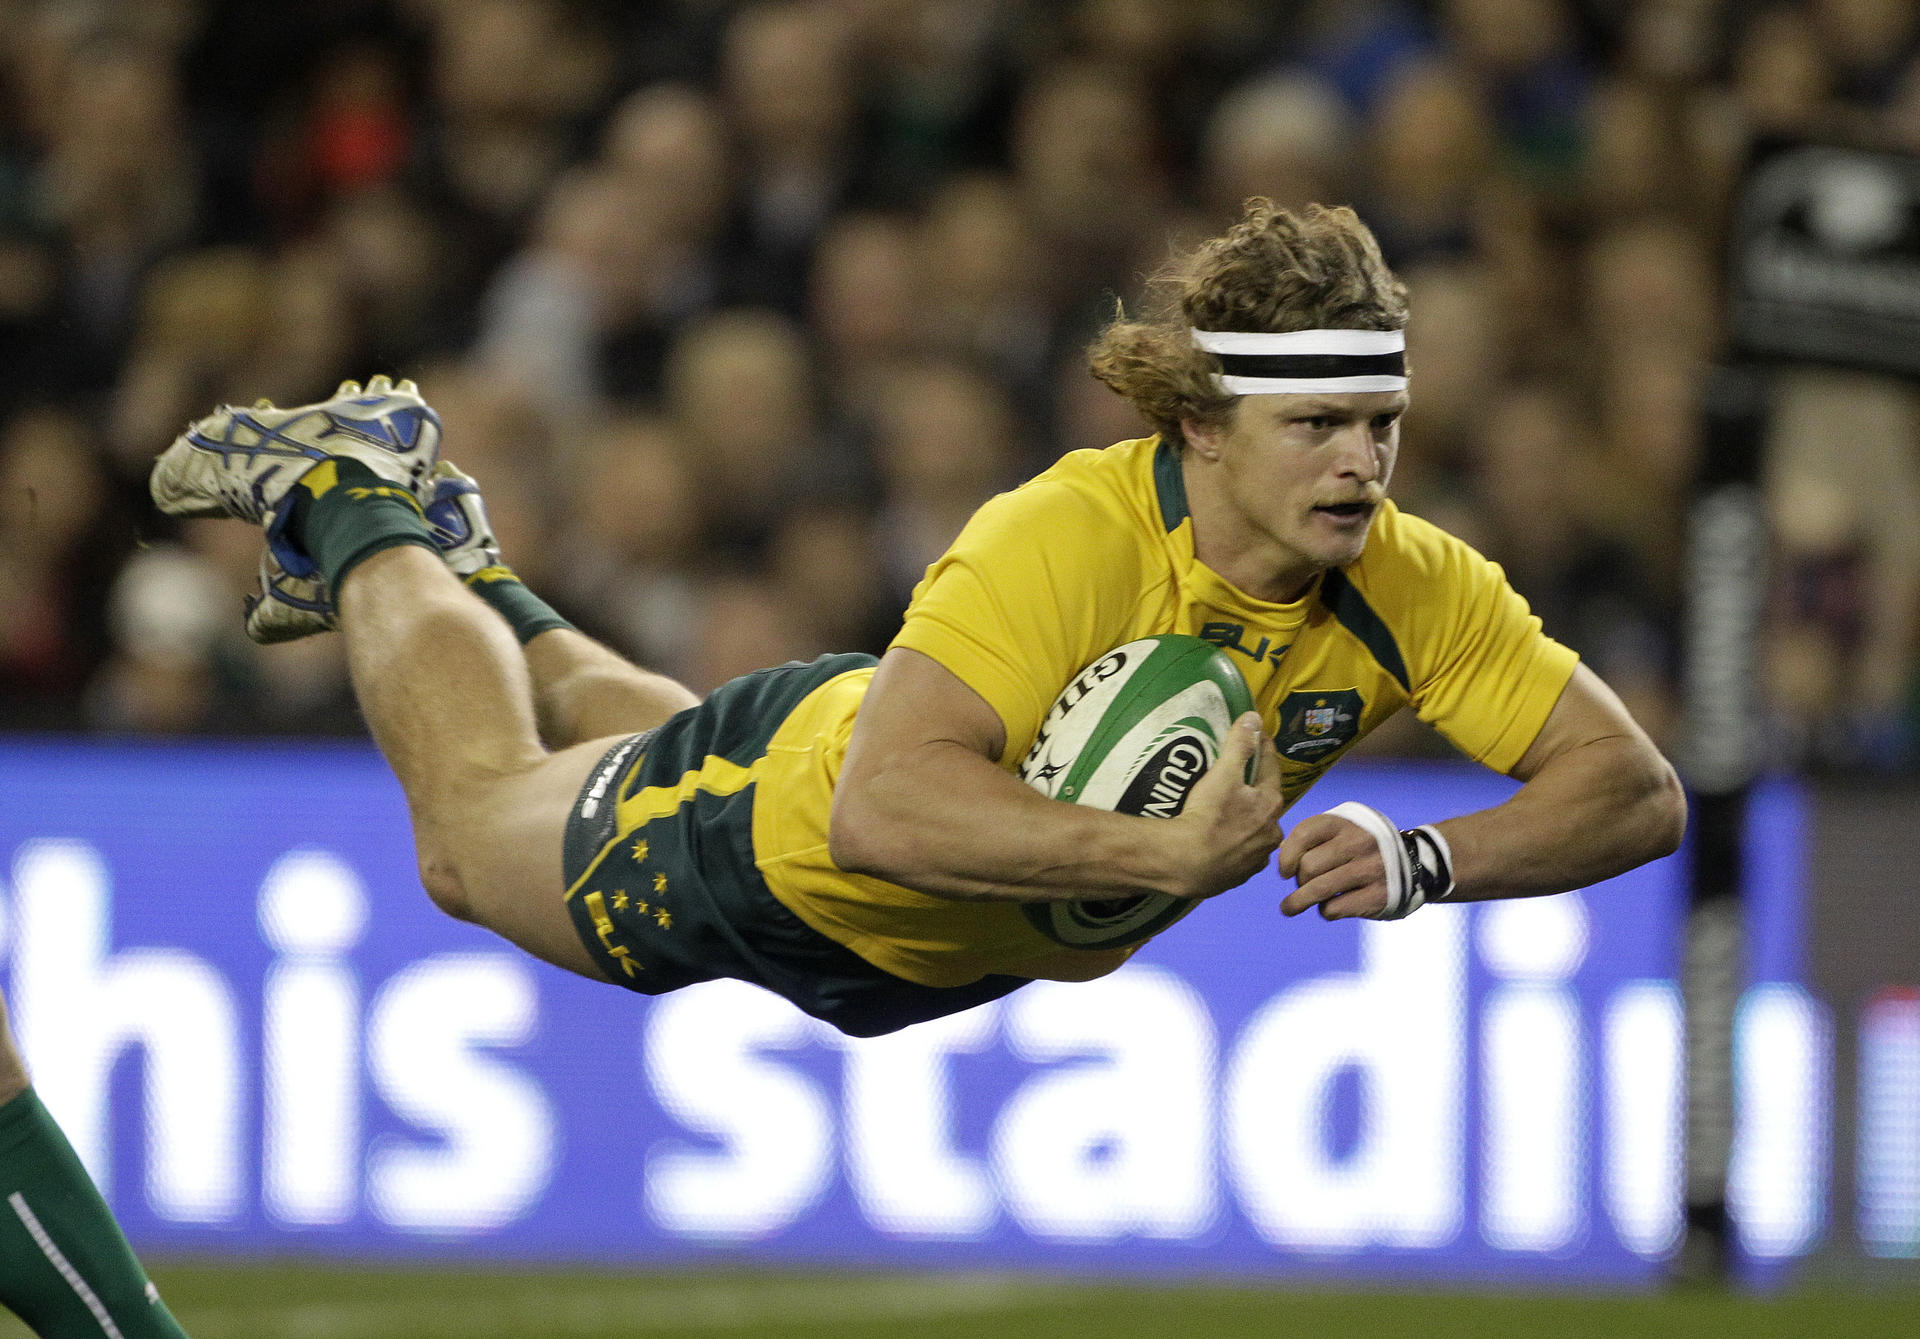 Western Force winger Nick Cummins, who started in all three tests for the Wallabies against France, is heading for Japan's Top League. Photo: AP